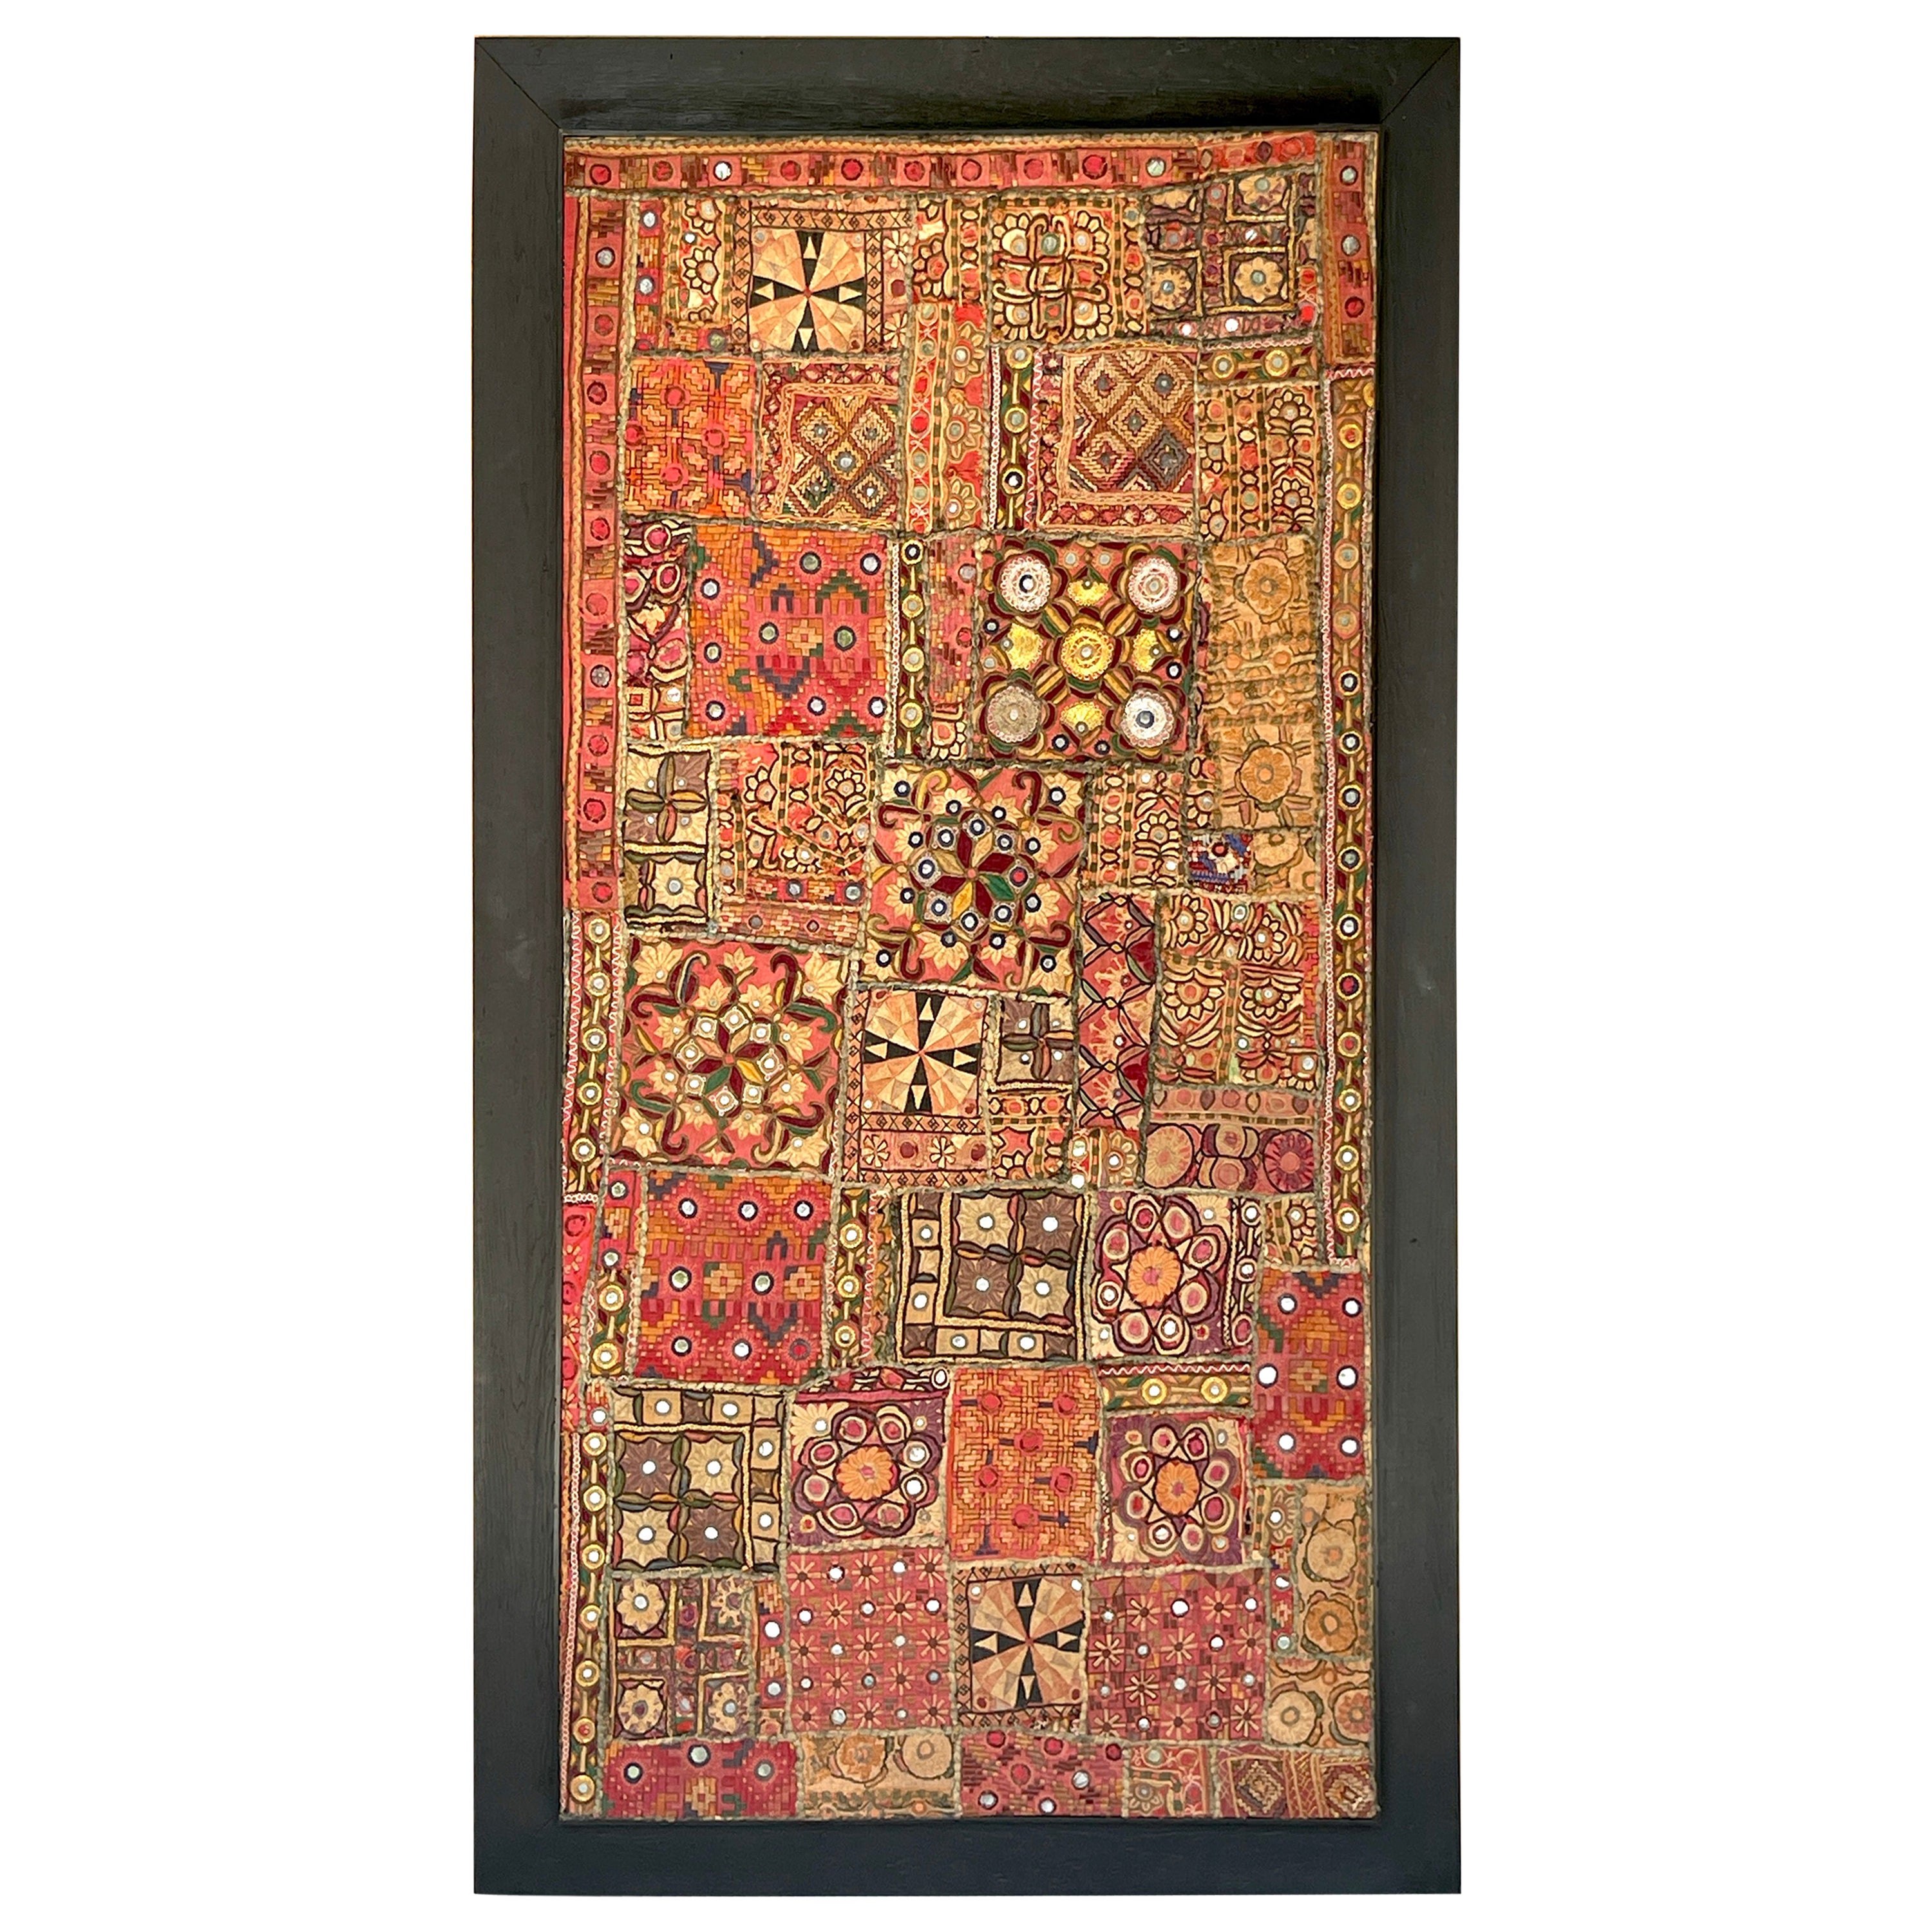 Vintage Indian Framed Embroidery/ Shisha Mosaic Tapestry by Shahzada For Sale